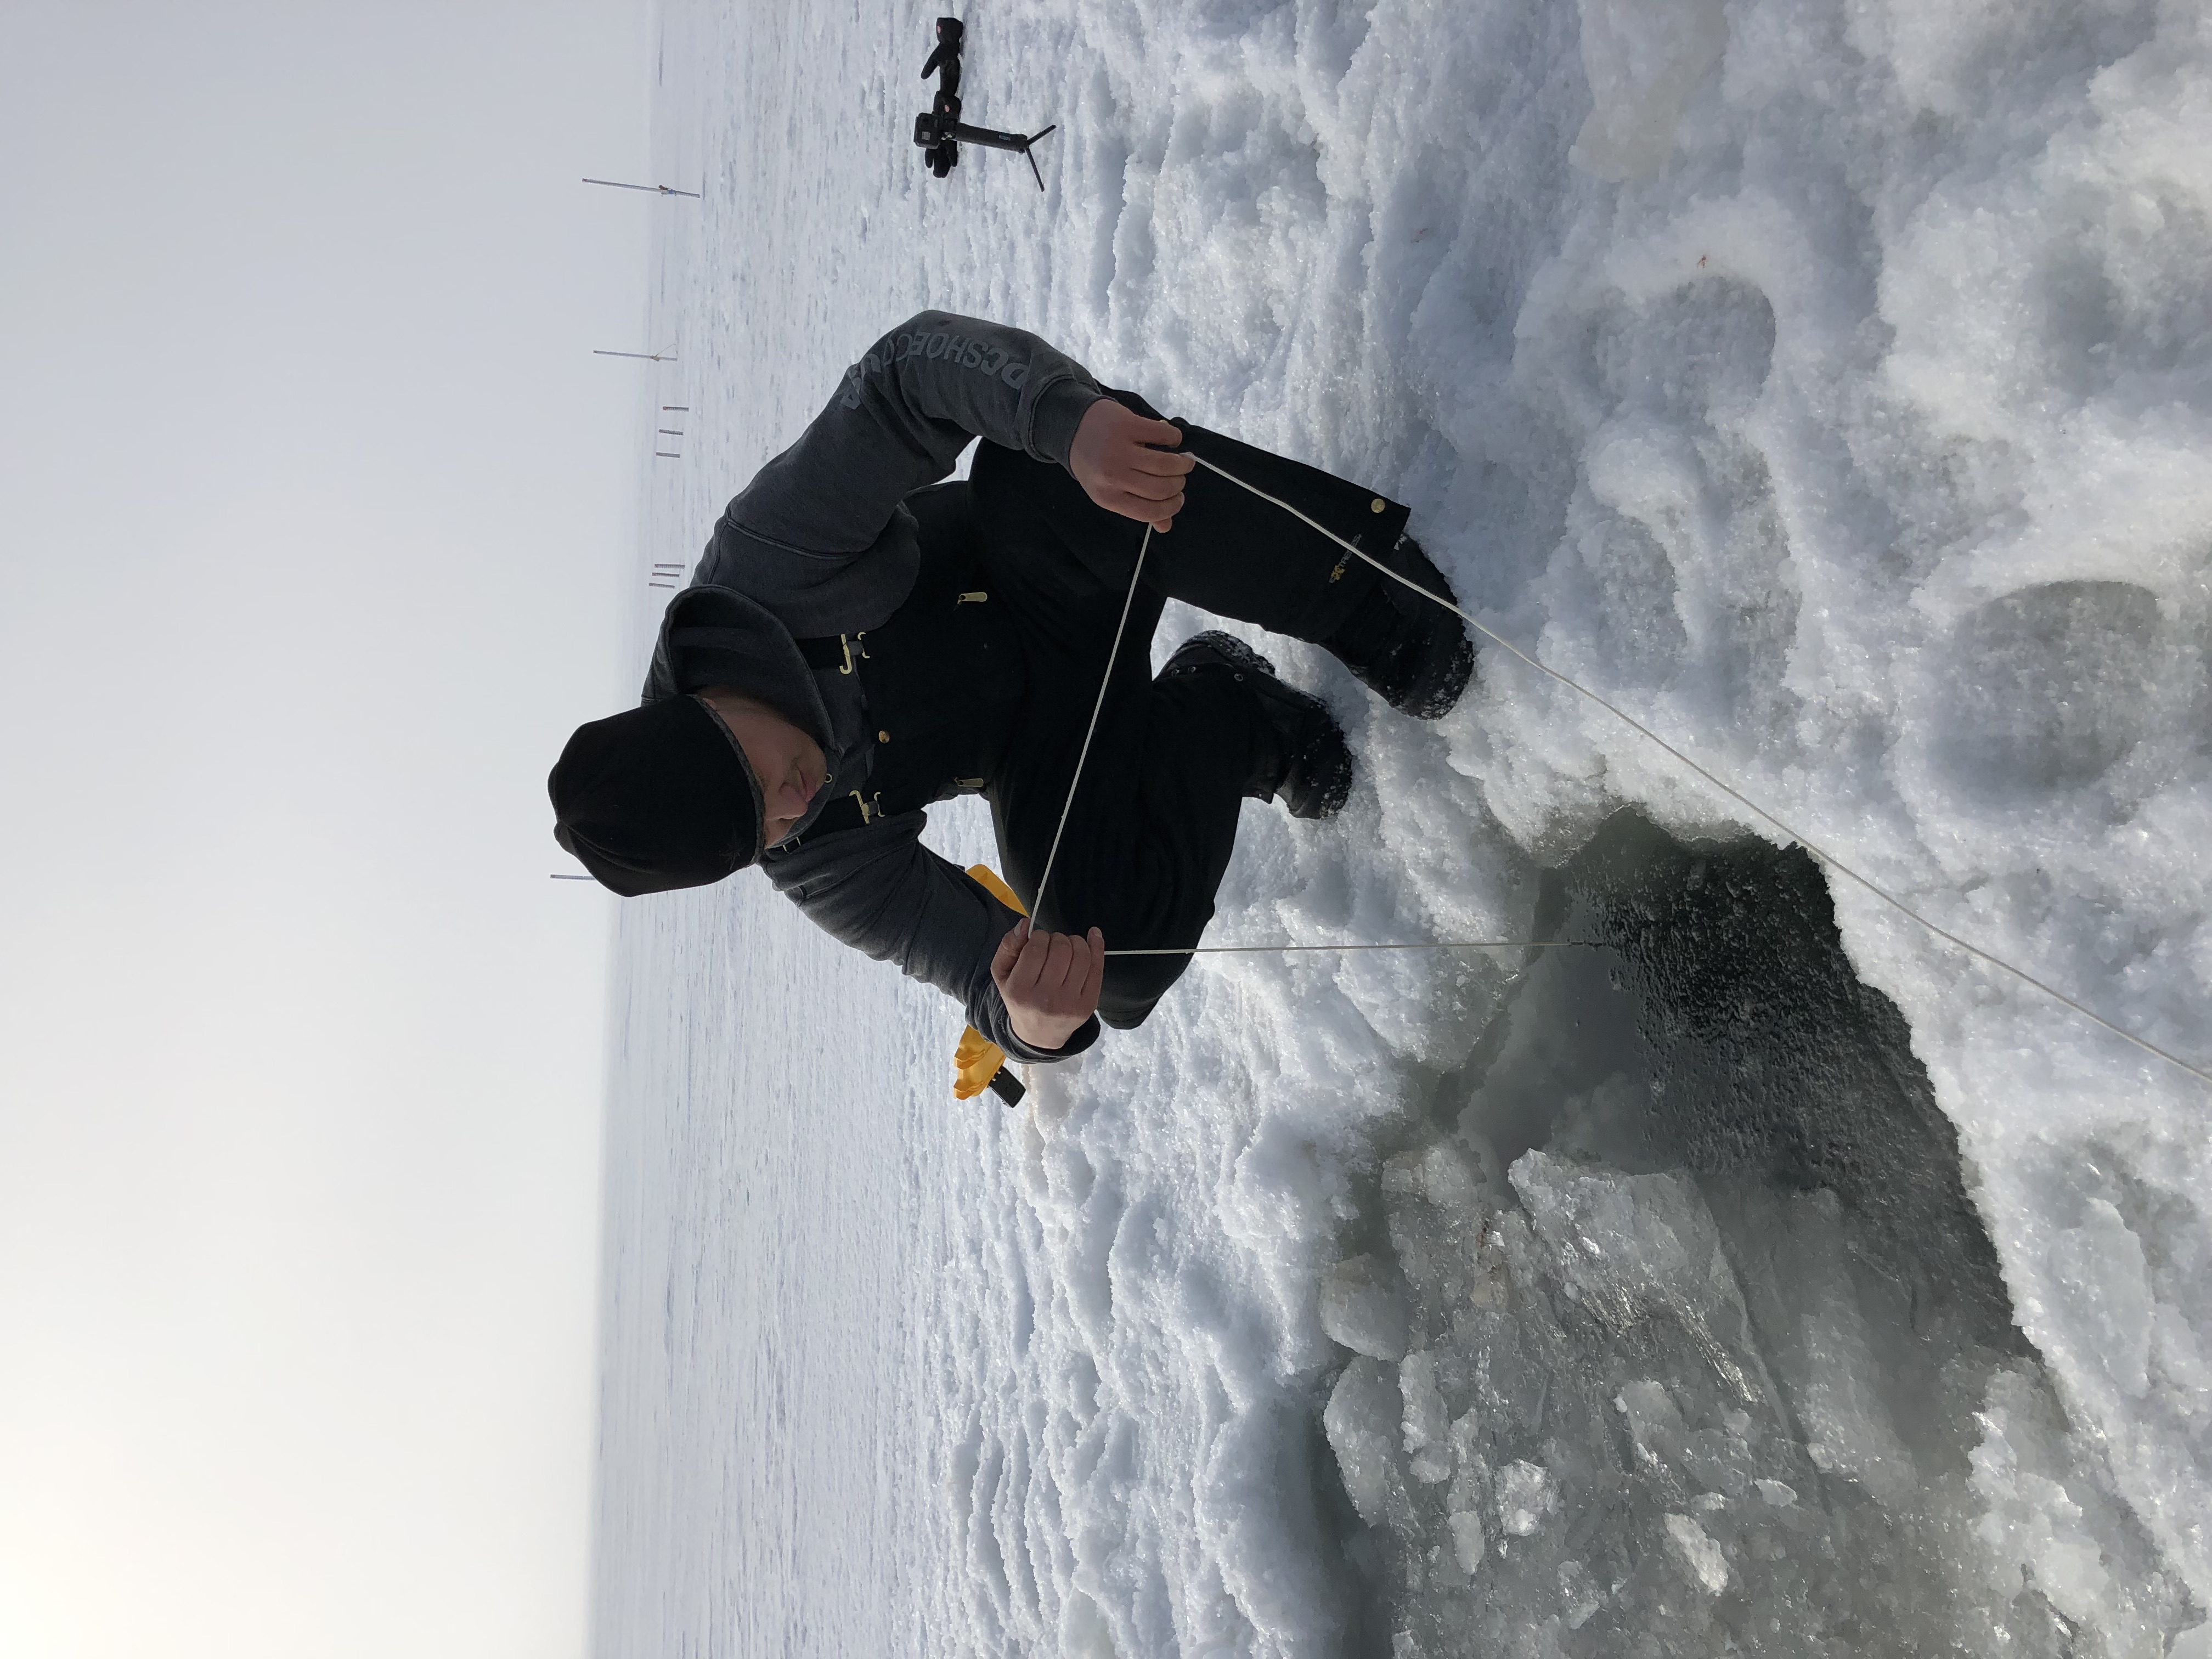 A man holding a line kneels at the edge of a hole in the ice filled with slushy water.